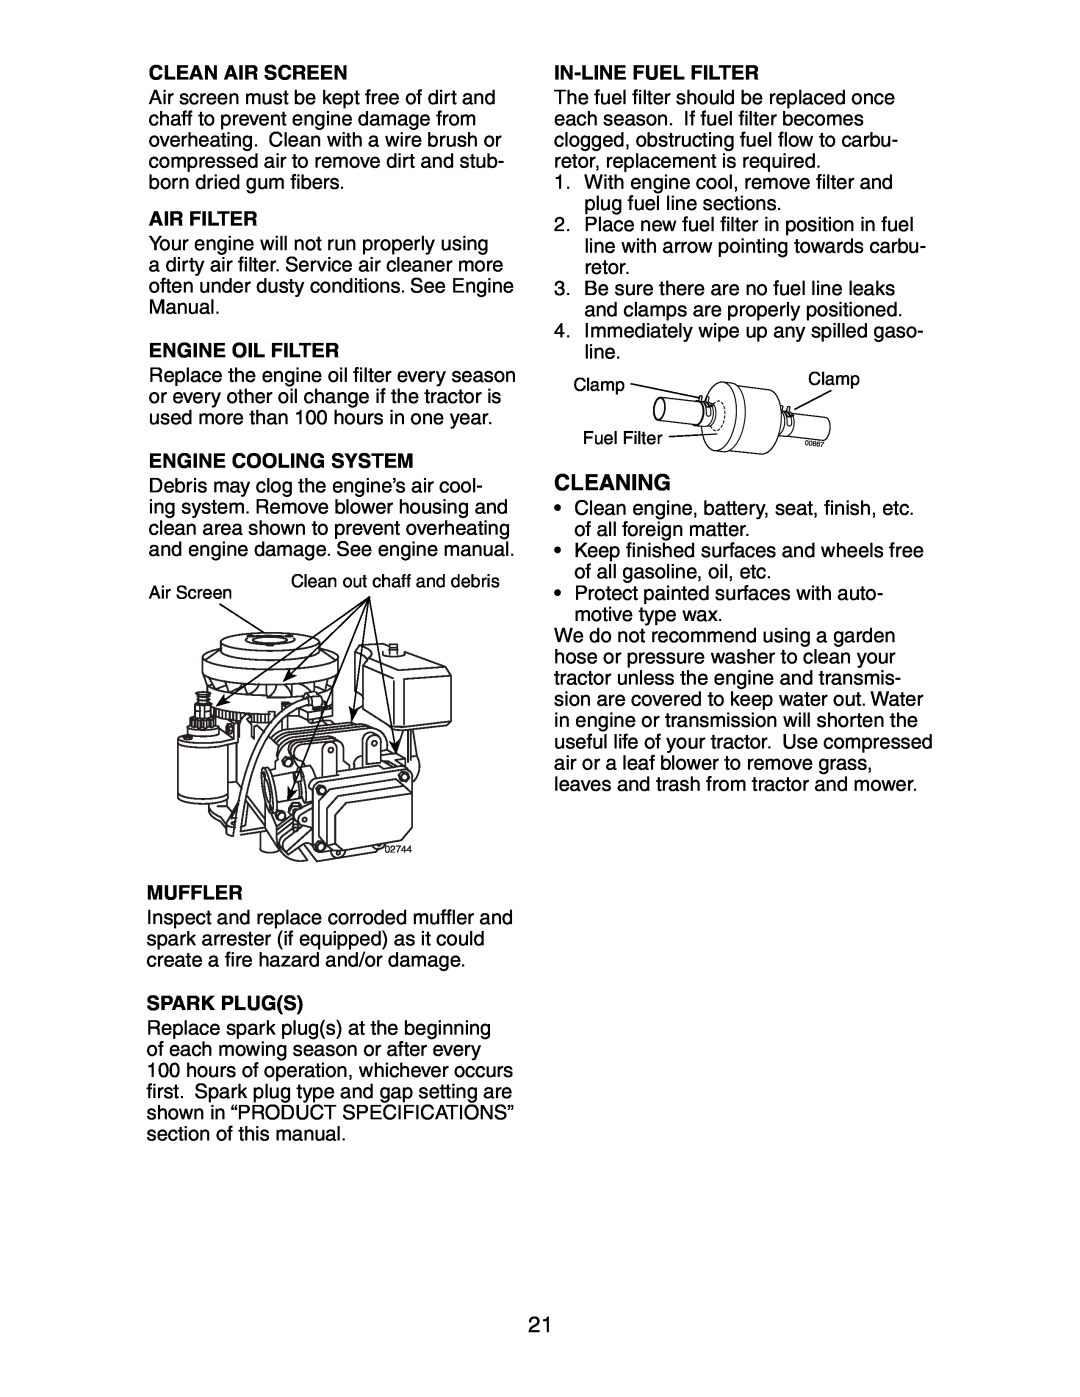 Poulan 191663 manual Cleaning, Clean Air Screen, Air Filter, Engine Oil Filter, Engine Cooling System, In-Line Fuel Filter 